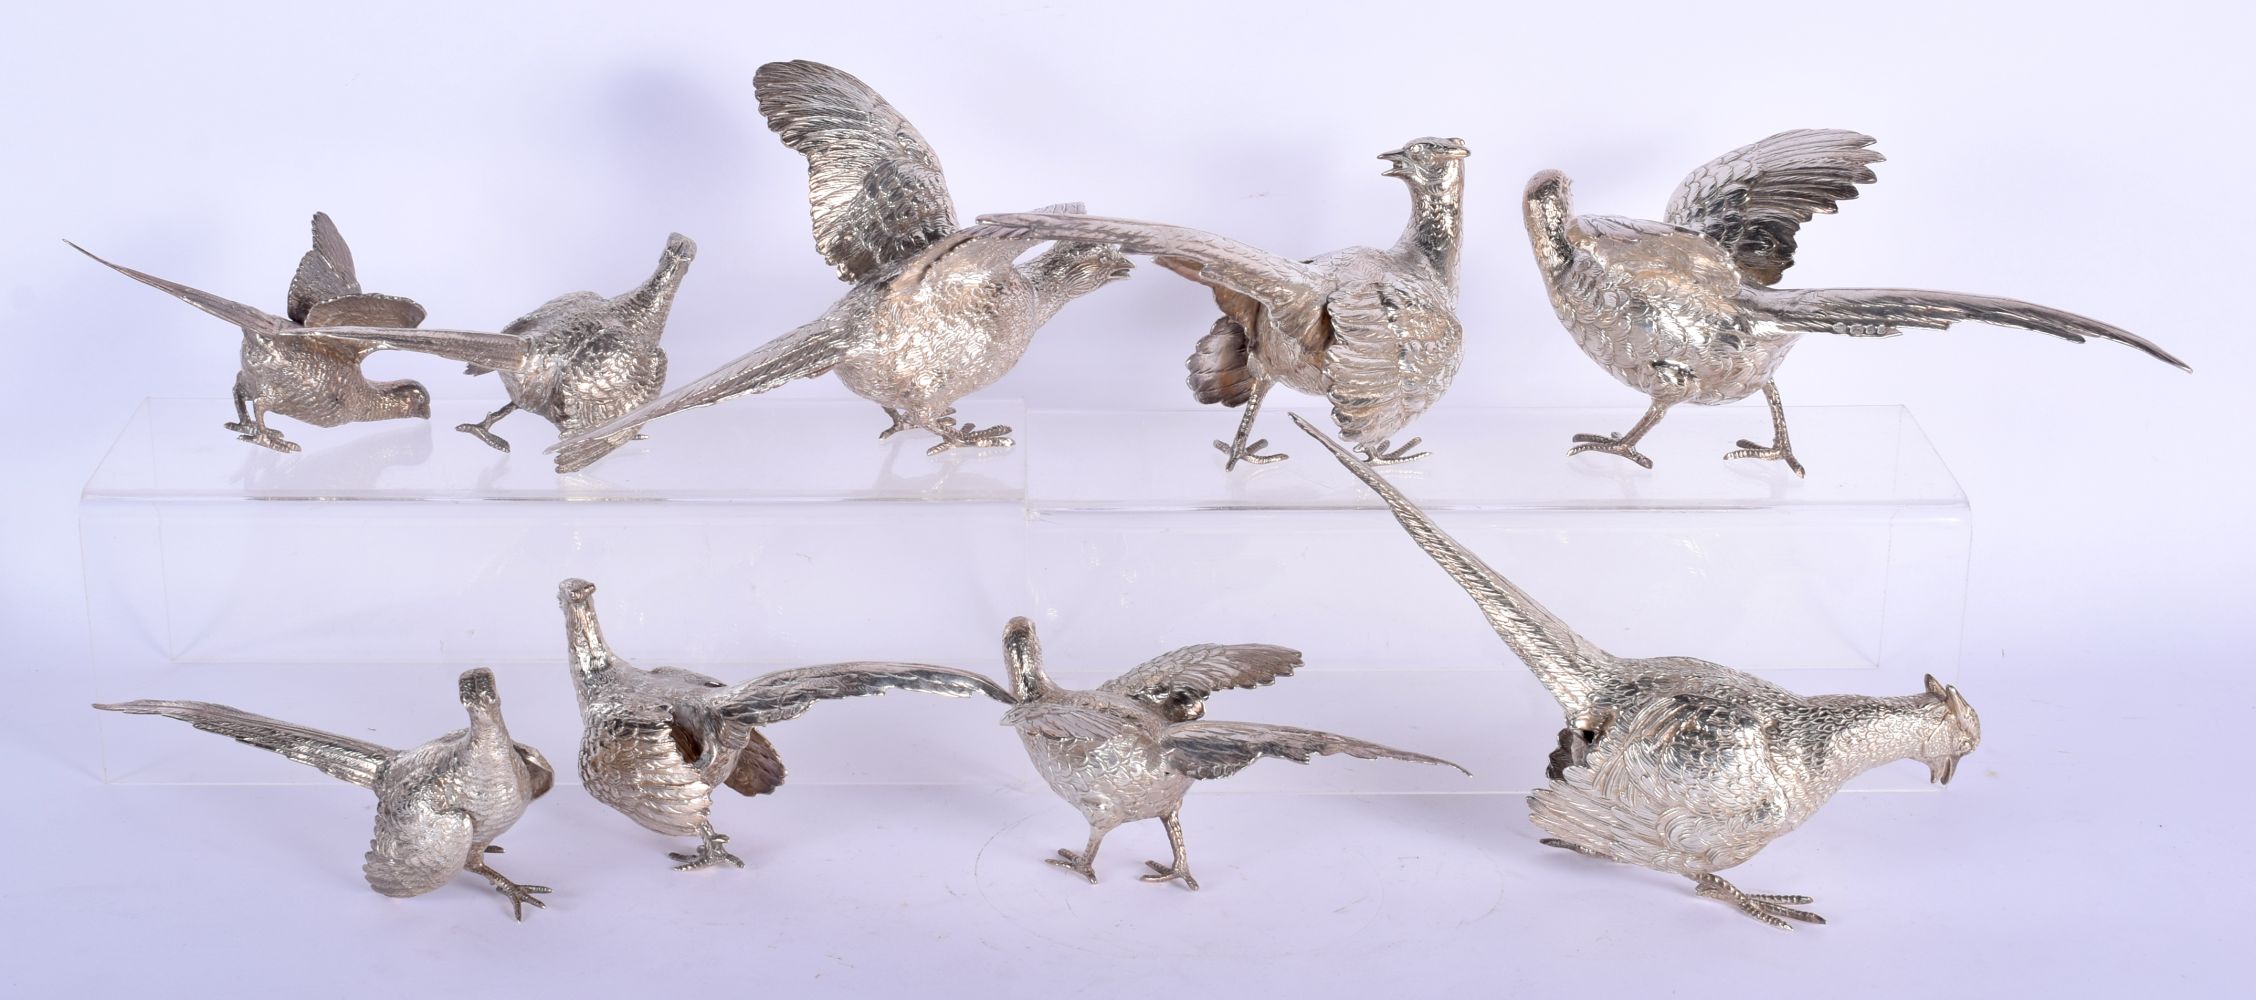 A FINE COLLECTION OF ENGLISH SILVER MODELS OF GAME BIRDS each modelled in various stances. 2196 gram - Image 2 of 7